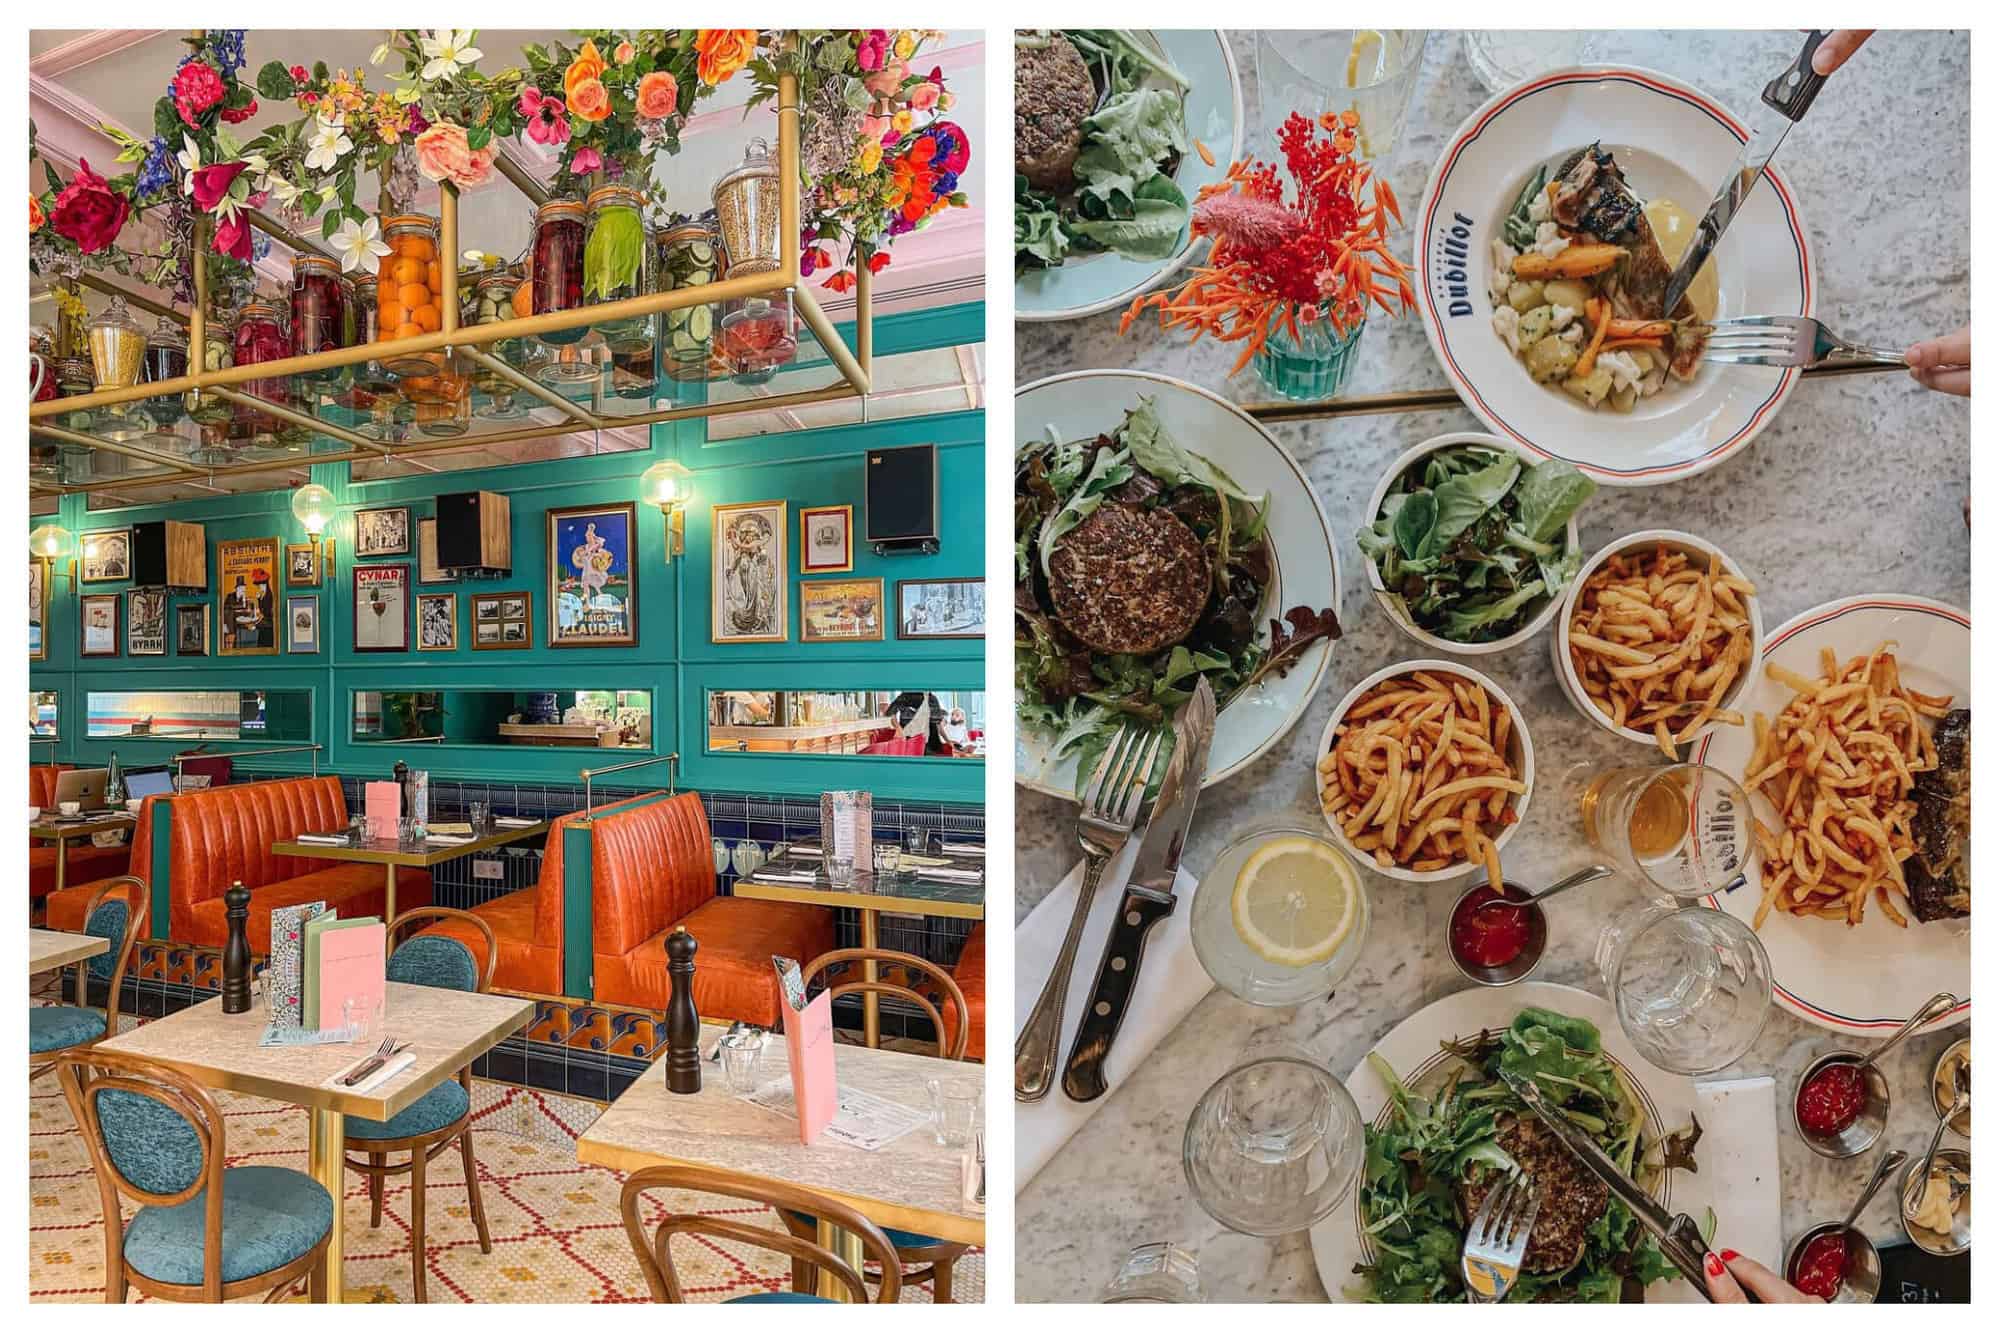 Left: the interior at Brasserie Dubillot with turquoise walls, orange bench seats, lots of picture frames on the wall, and a shelf hanging from the roof full of jars of pickled fruit and vegetables, and decorated with flowers. Right: a birds-eye view of a table full of food at Brasserie Dubillot. 